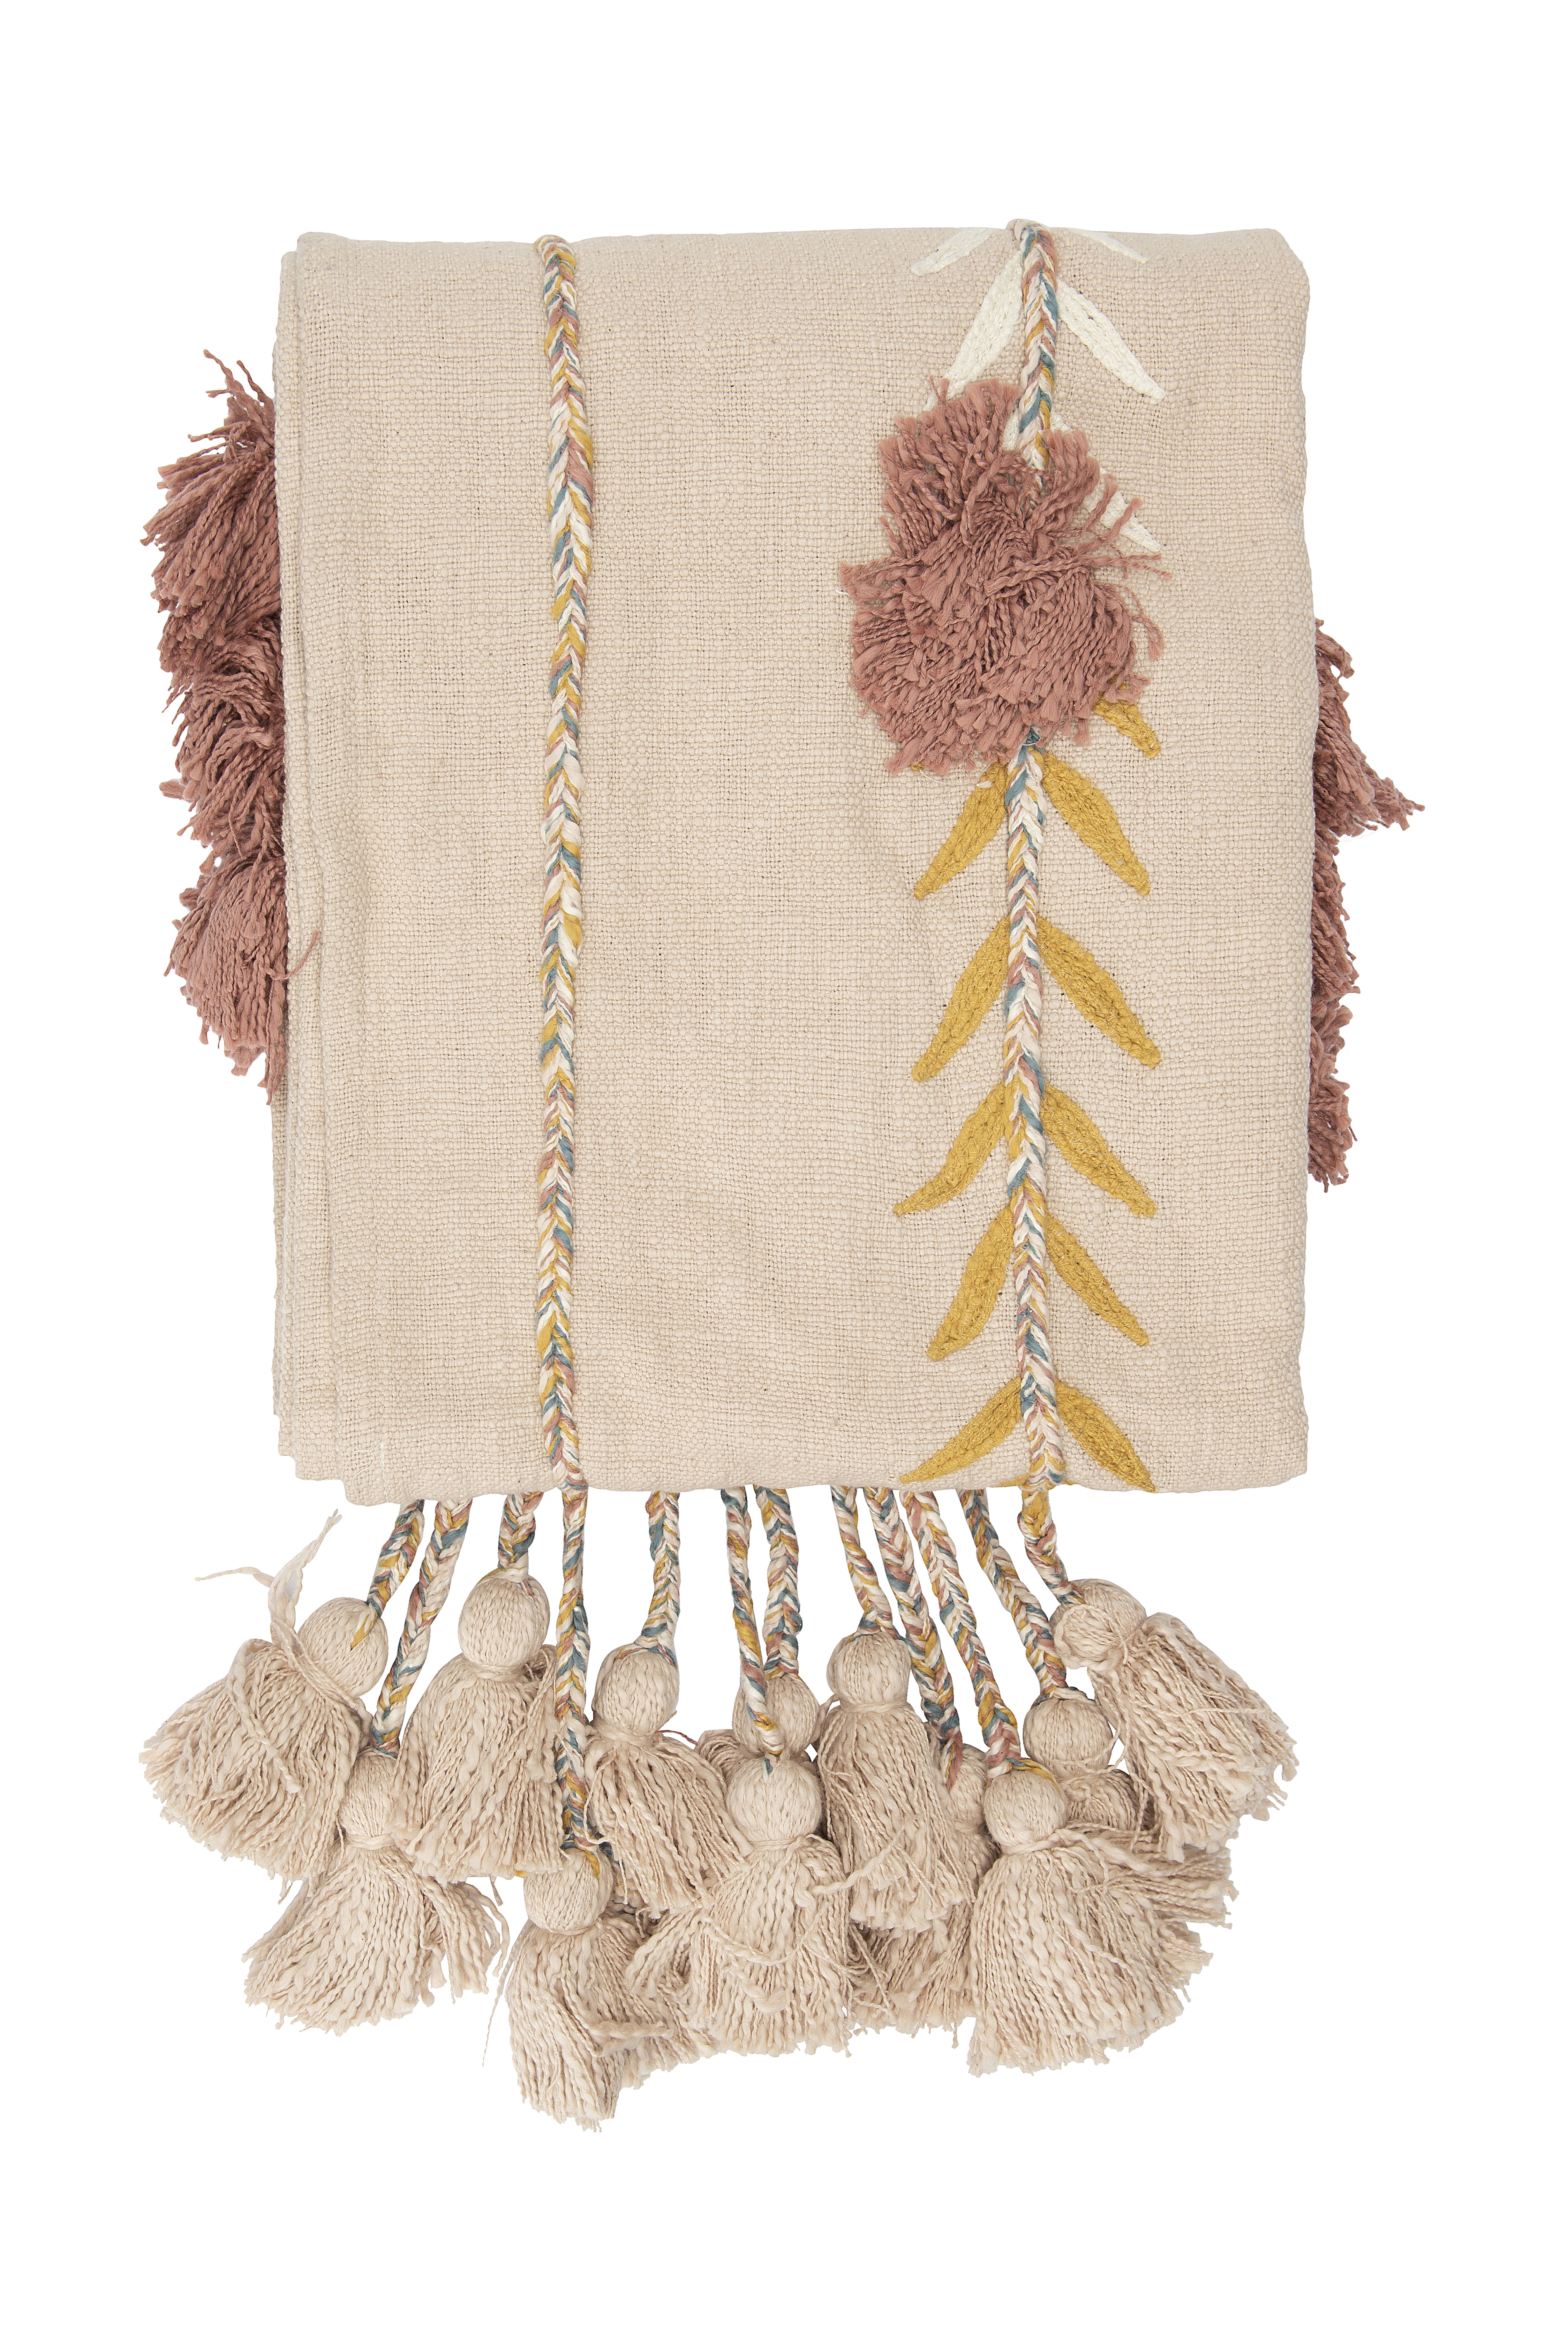 Embroidered Throw with Decorative Applique, Pom Poms & Tassels, Pink Cotton - Image 0